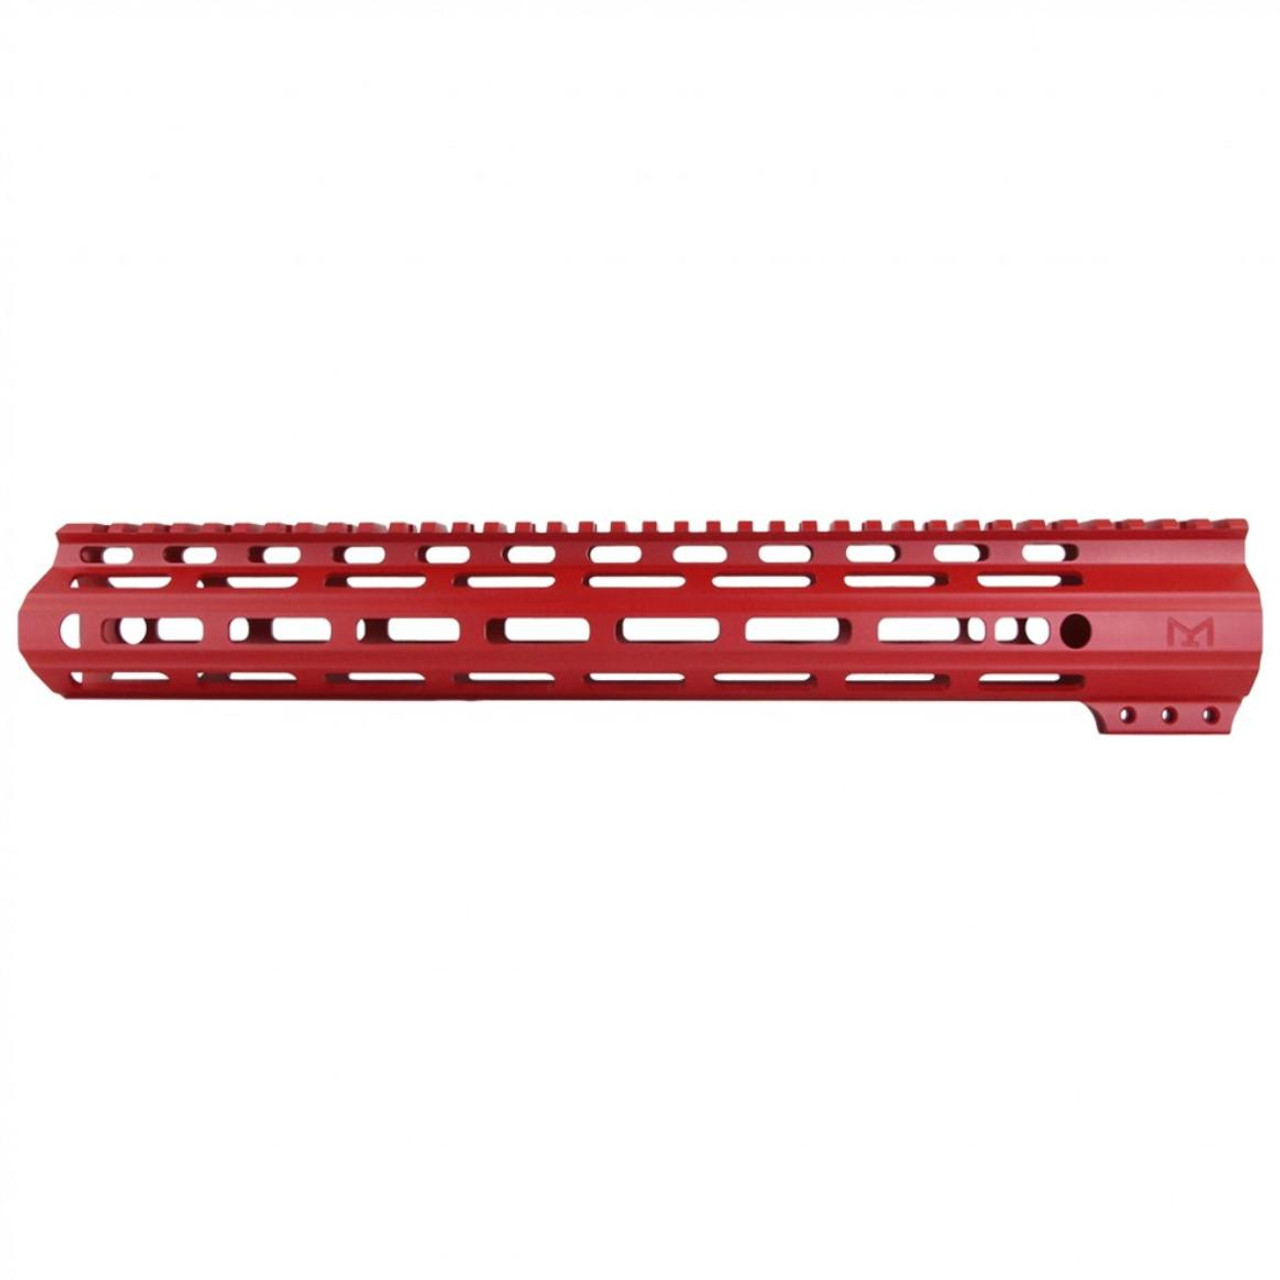 MCS AR-15 M-Lok Super Slim Light Free Float Handguard MADE IN USA Red Options Available 